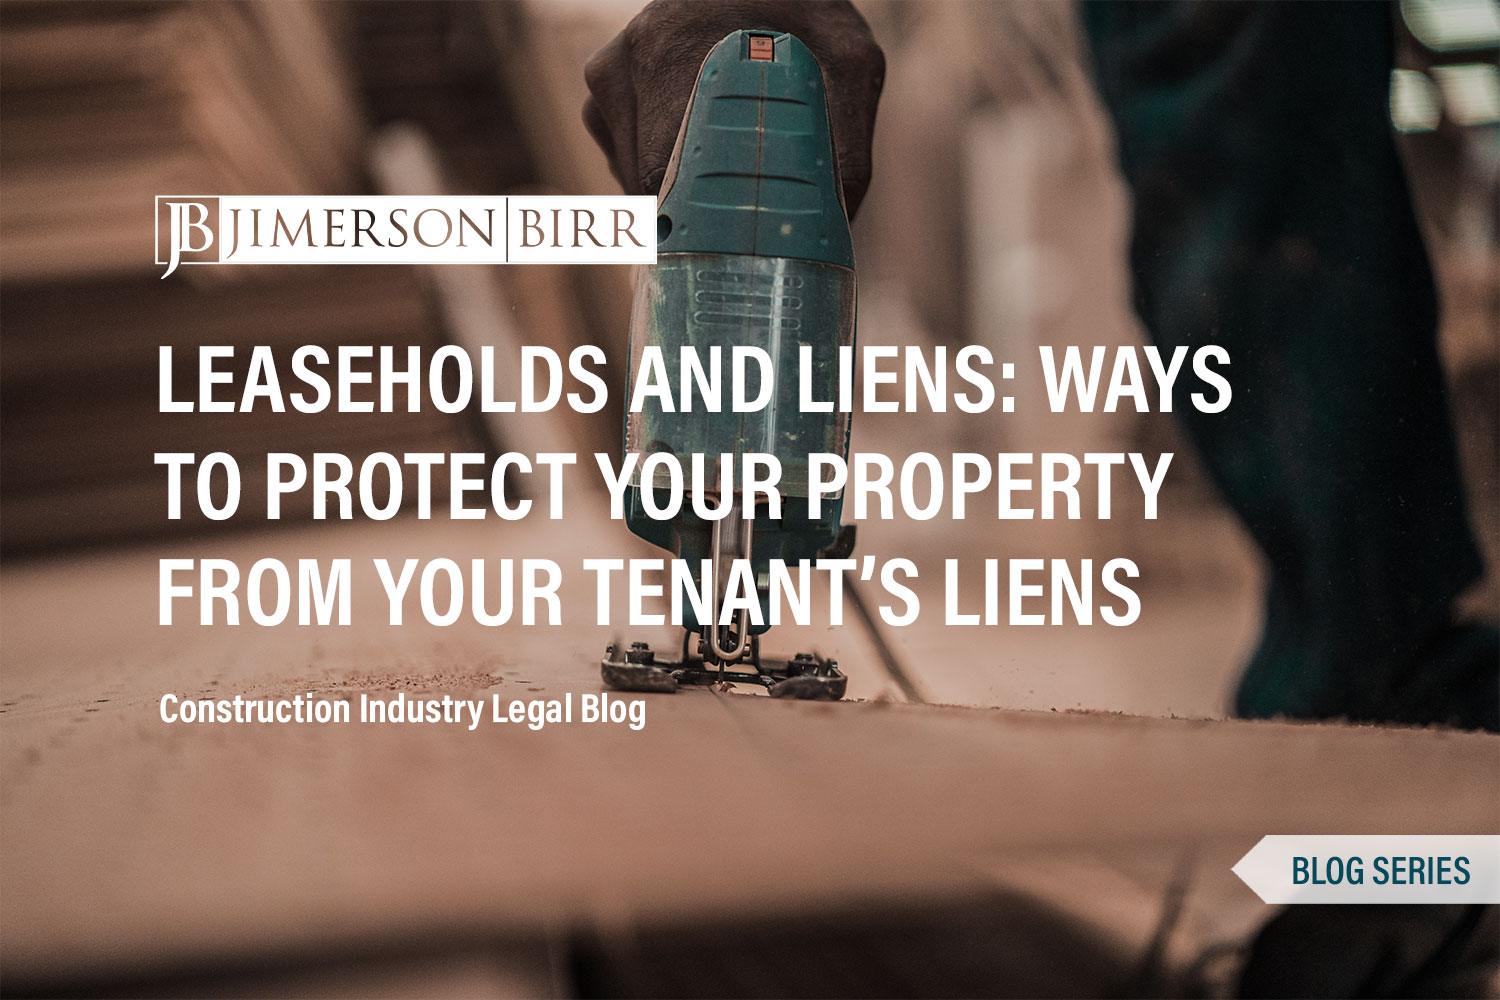 How Property Owners Can Protect Their Property from Liens When a Tenant Makes Improvements